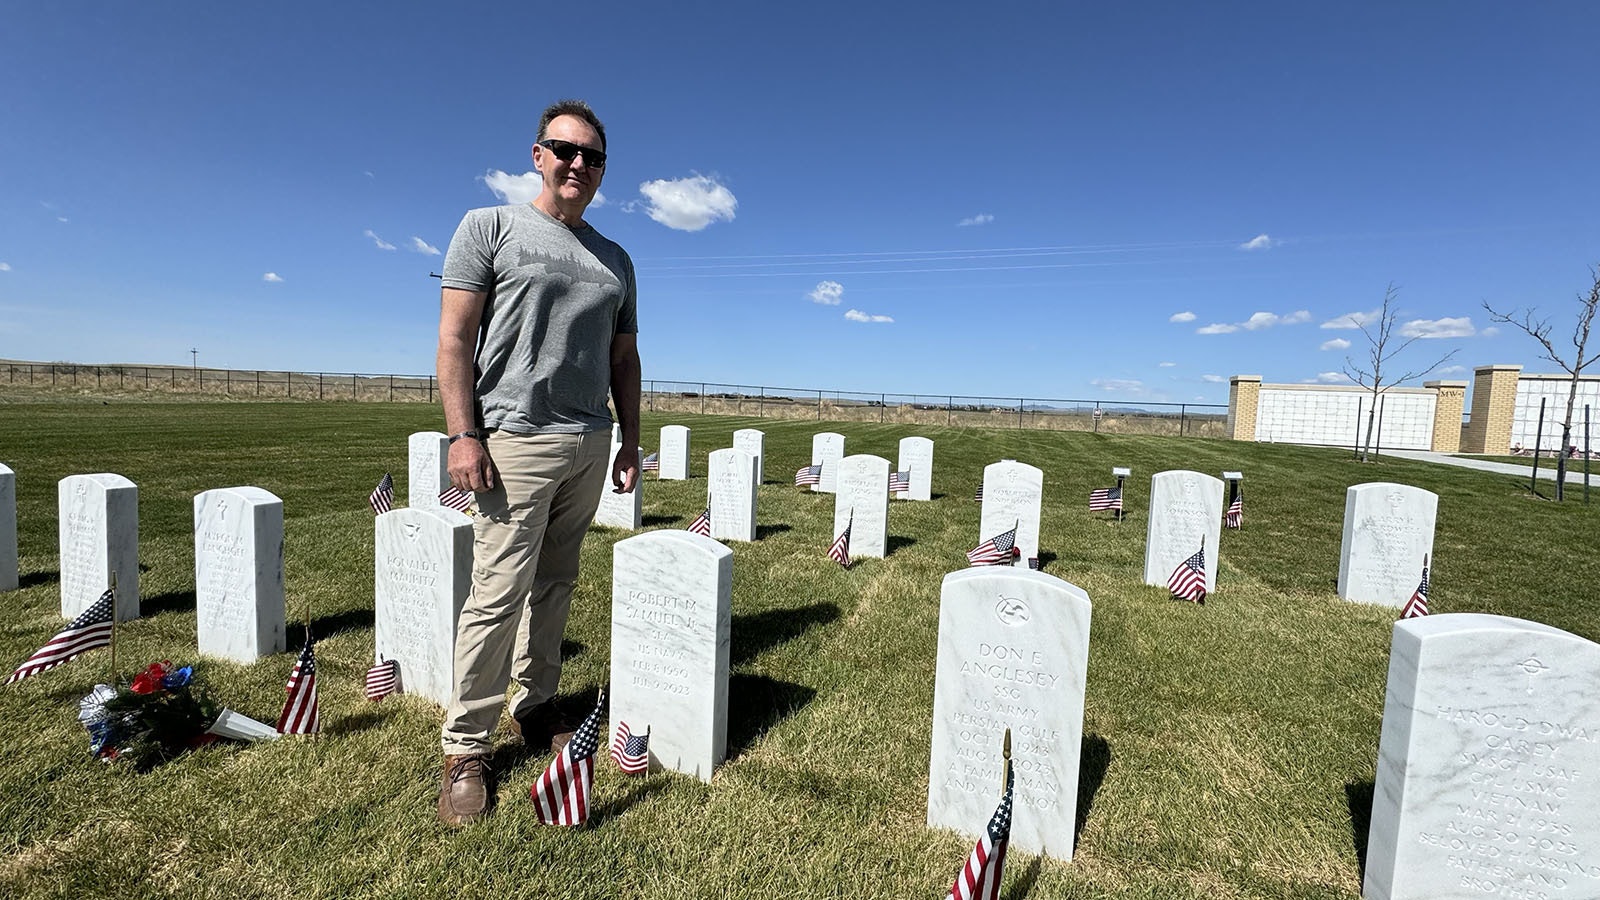 Richard Tygret, 58, showed up at the Cheyenne National Cemetery on Monday to randomly place an American flag on the burial site of a military officer who he doesn’t know.  The deceased person, Robert M. Samuel Jr., served in the Navy, and was buried in the cemetery last July.   He was driving back from a camping weekend at the Vedauwoo recreation area when he felt moved to stop at the cemetery to recognize someone he didn’t know.